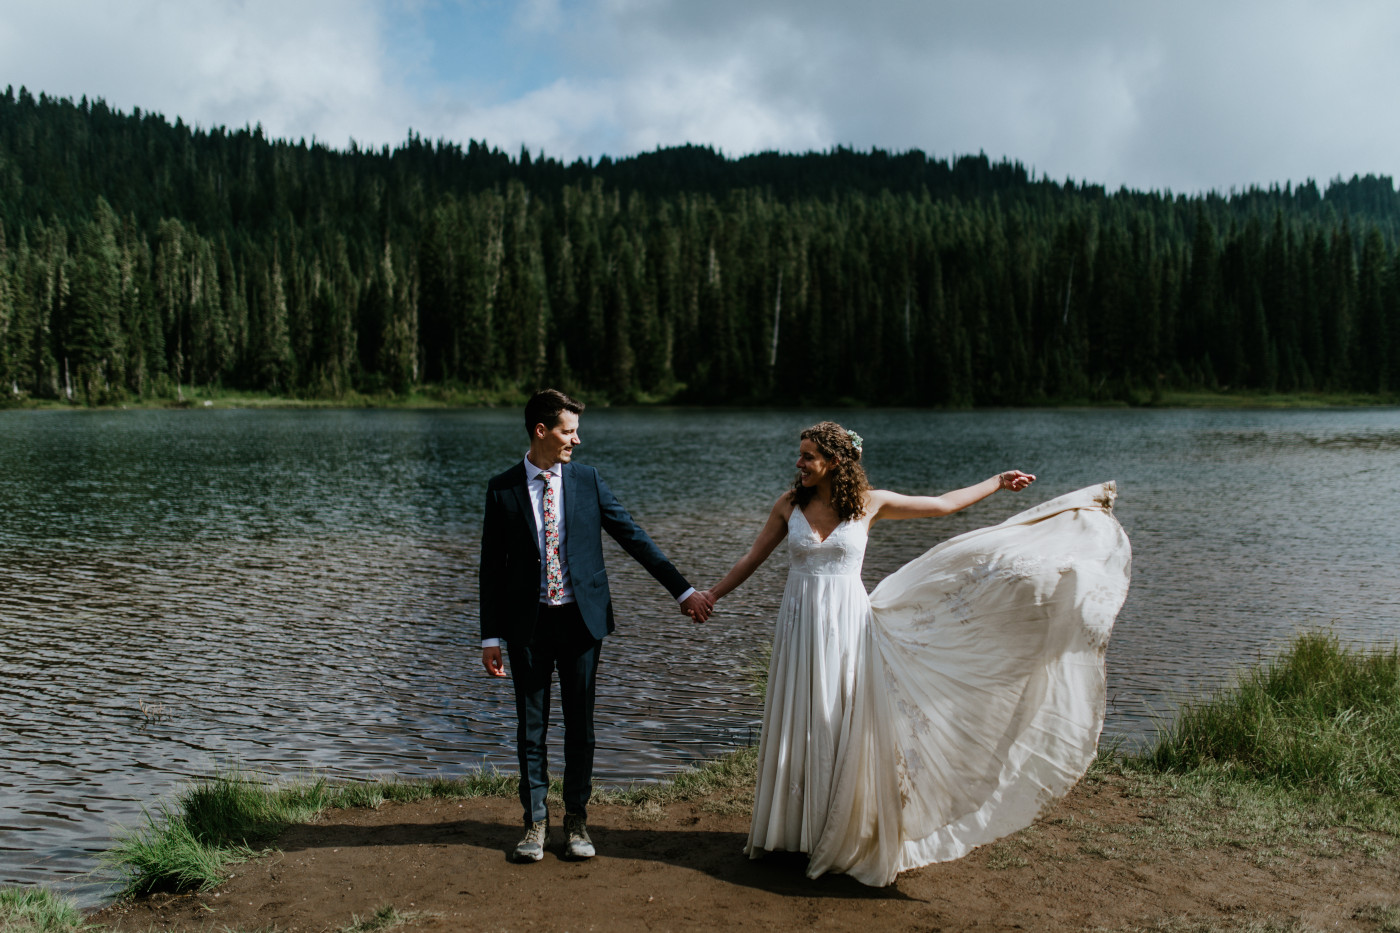 Tasha and Chad stand together in front of the lake. Elopement photography at Mount Rainier by Sienna Plus Josh.